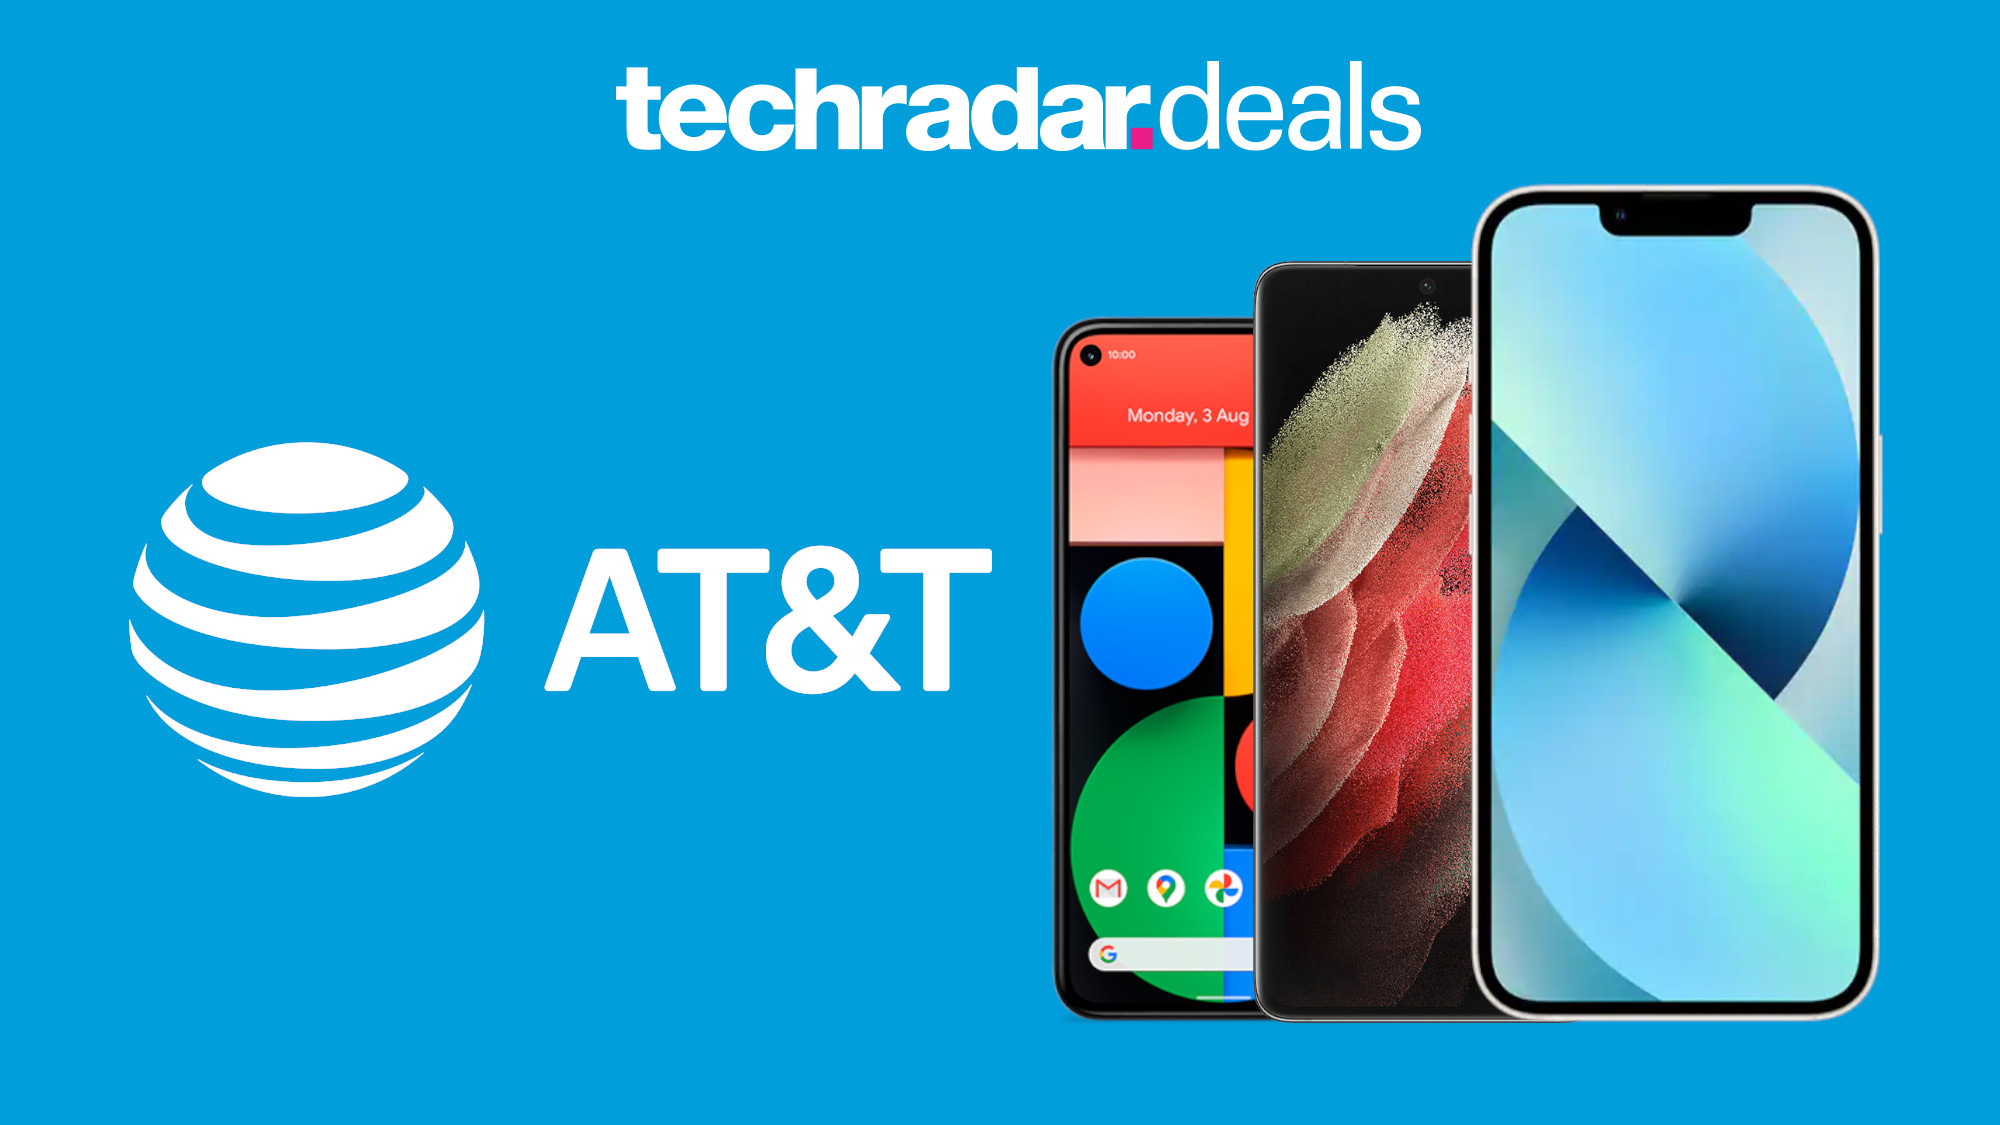 The Best At T Phone Deals For January 22 Free Iphones Discounts And More Techradar